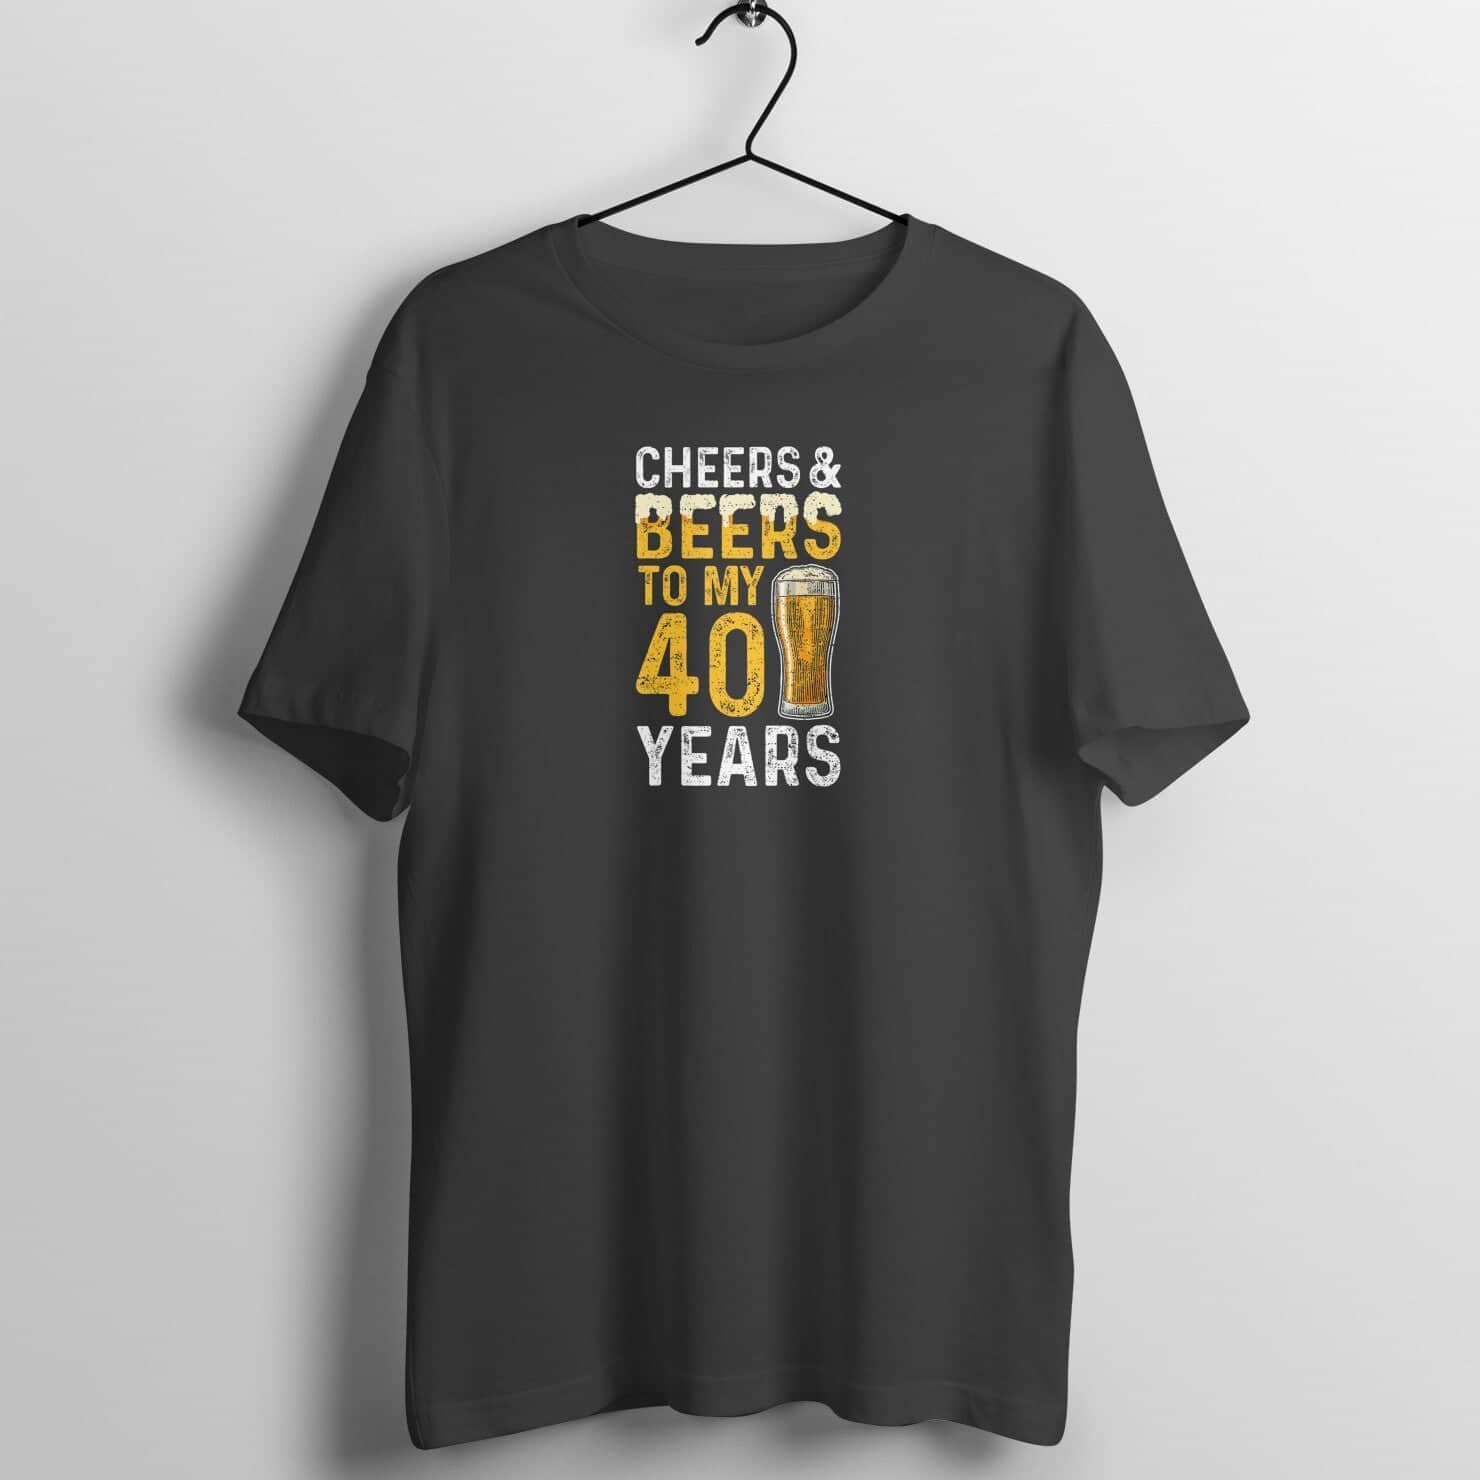 Cheers and Beers to My Forty Years Exclusive Black T Shirt for Men and Women Printrove Black S 